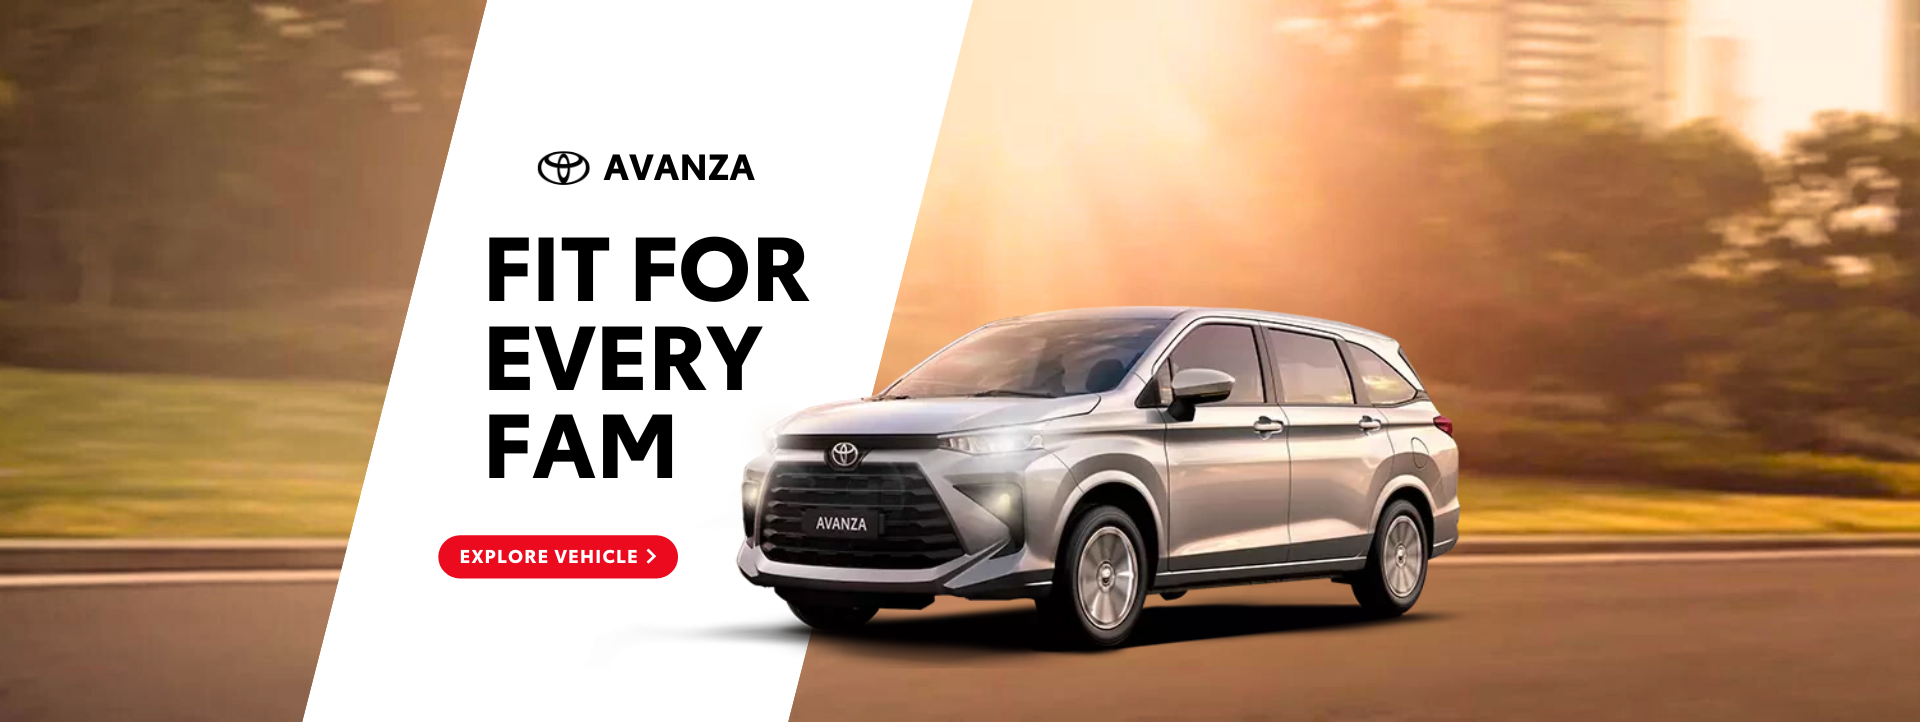 Avanza | Fit for Every Fam